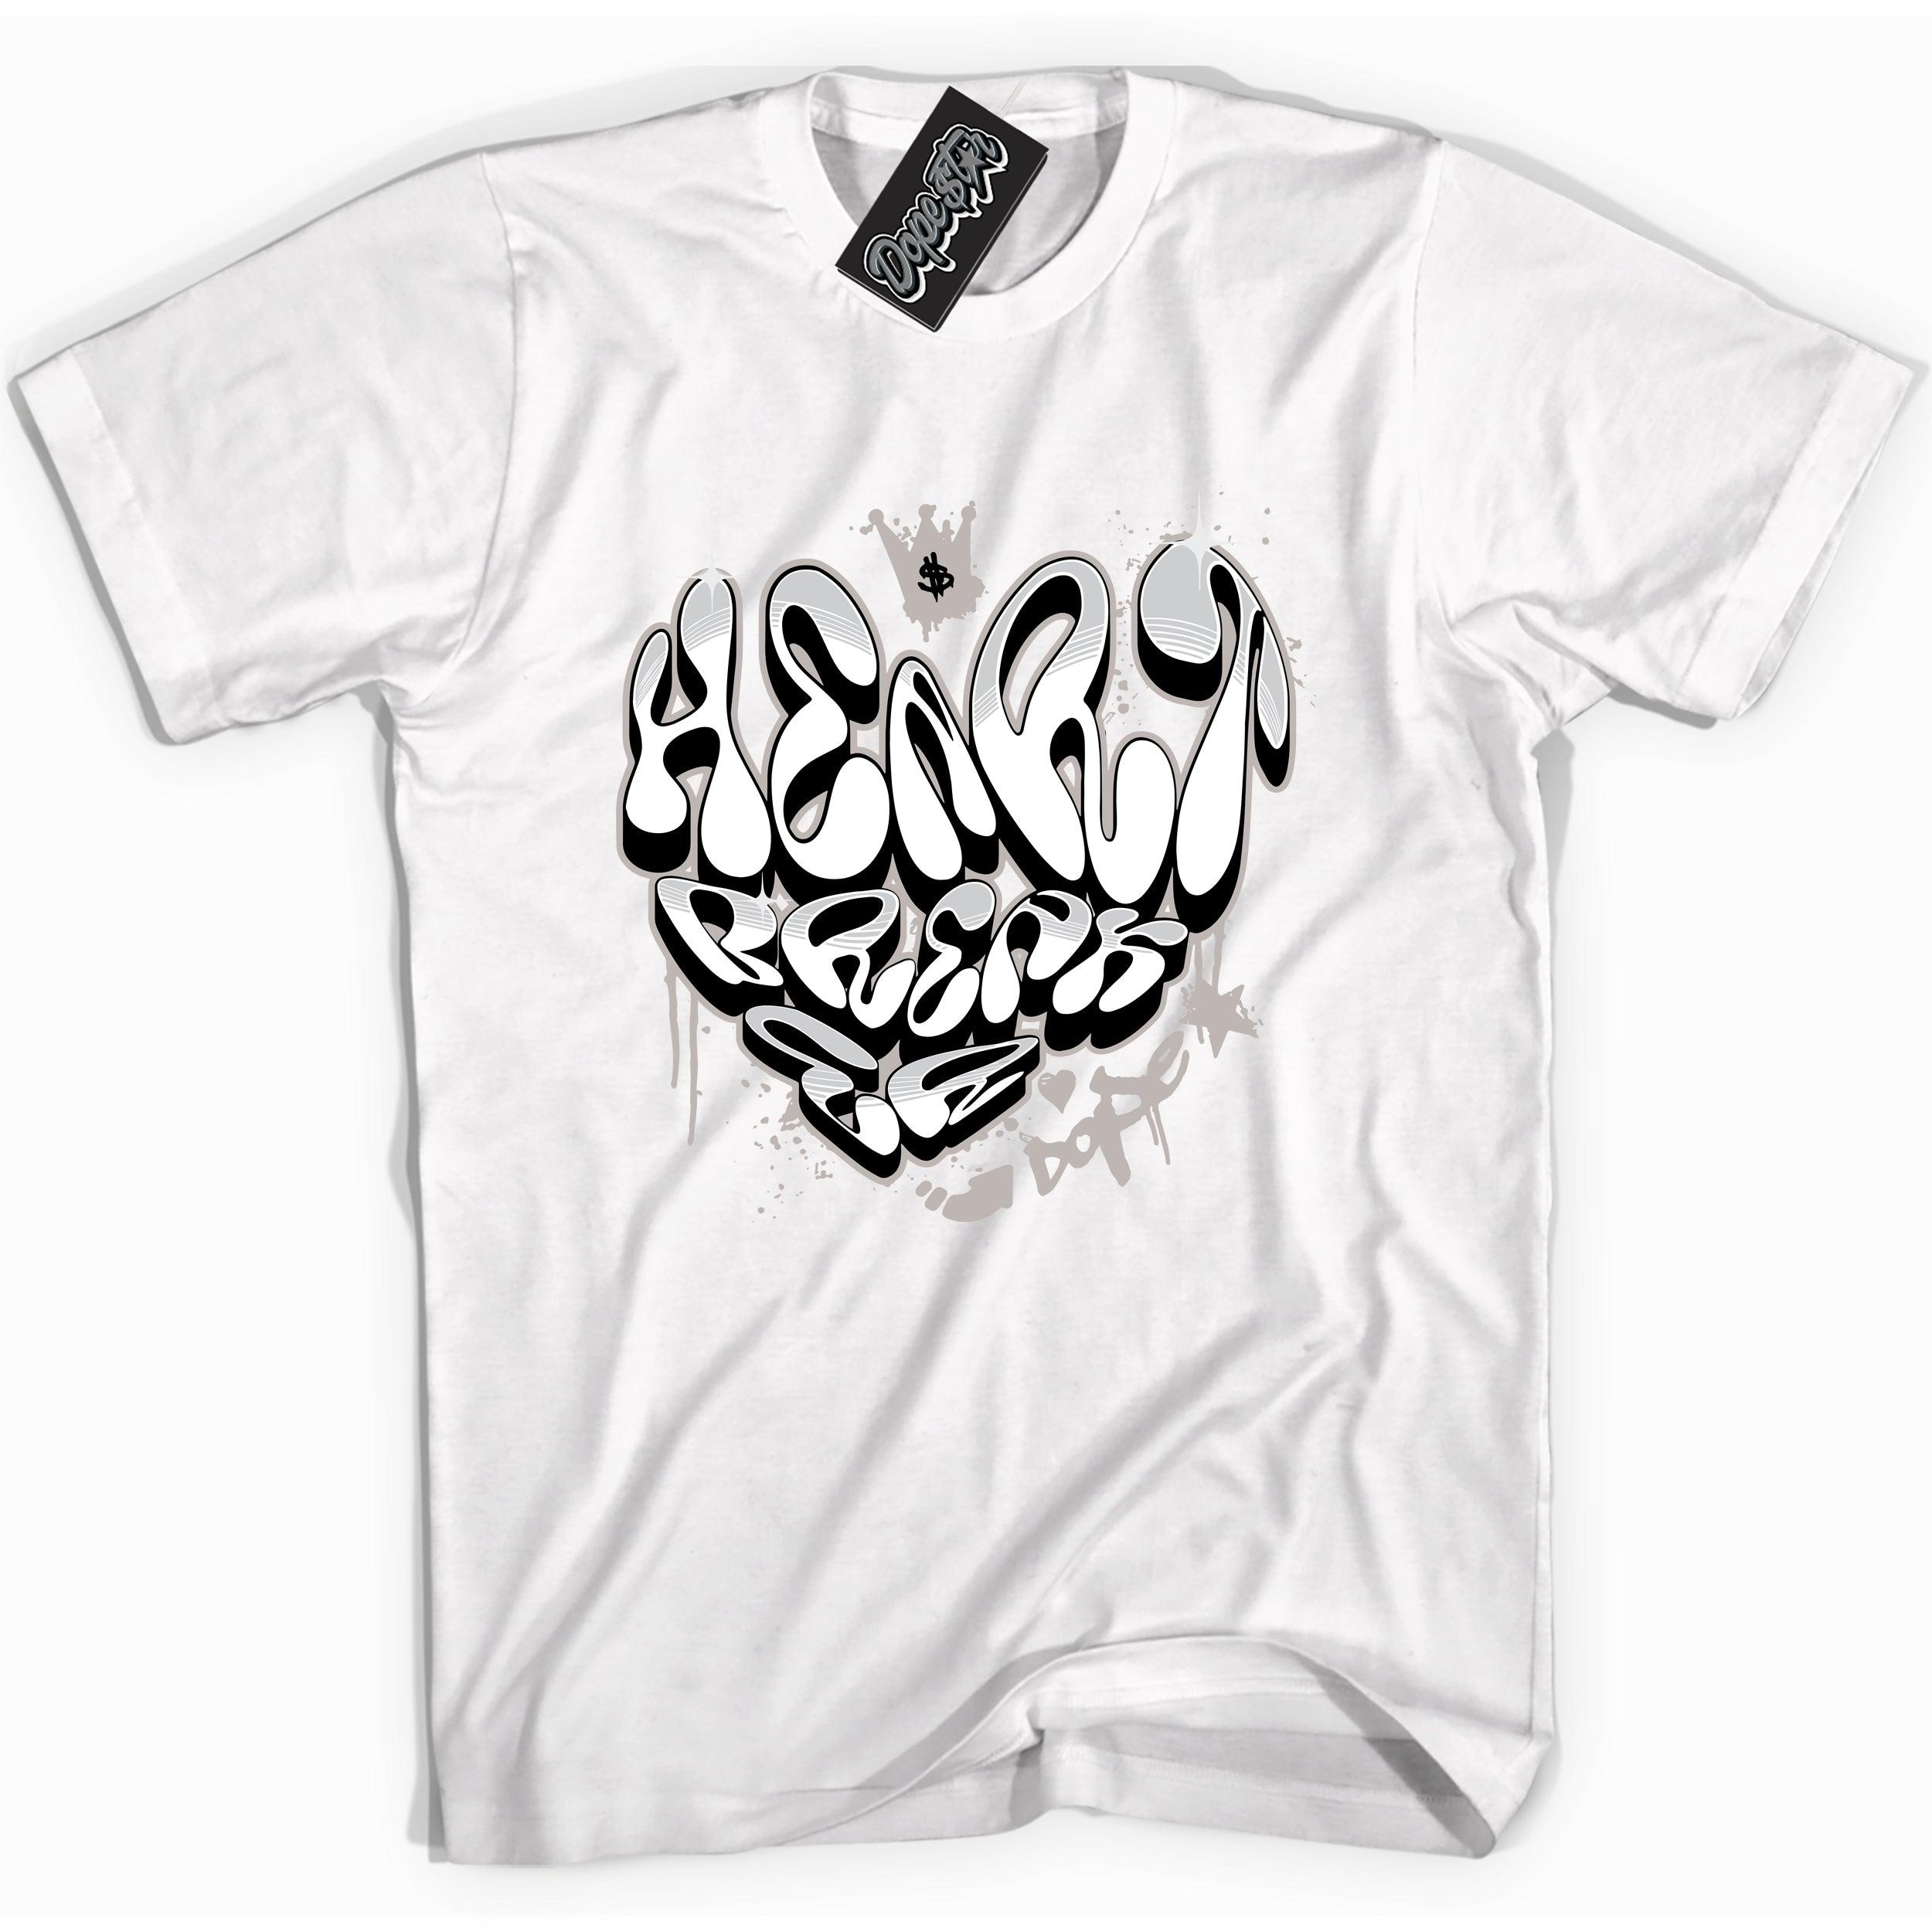 Cool White Shirt With Heartbreaker Graffiti design That Perfectly Matches AIR JORDAN 4 RETRO MILITARY BLACK Sneakers.